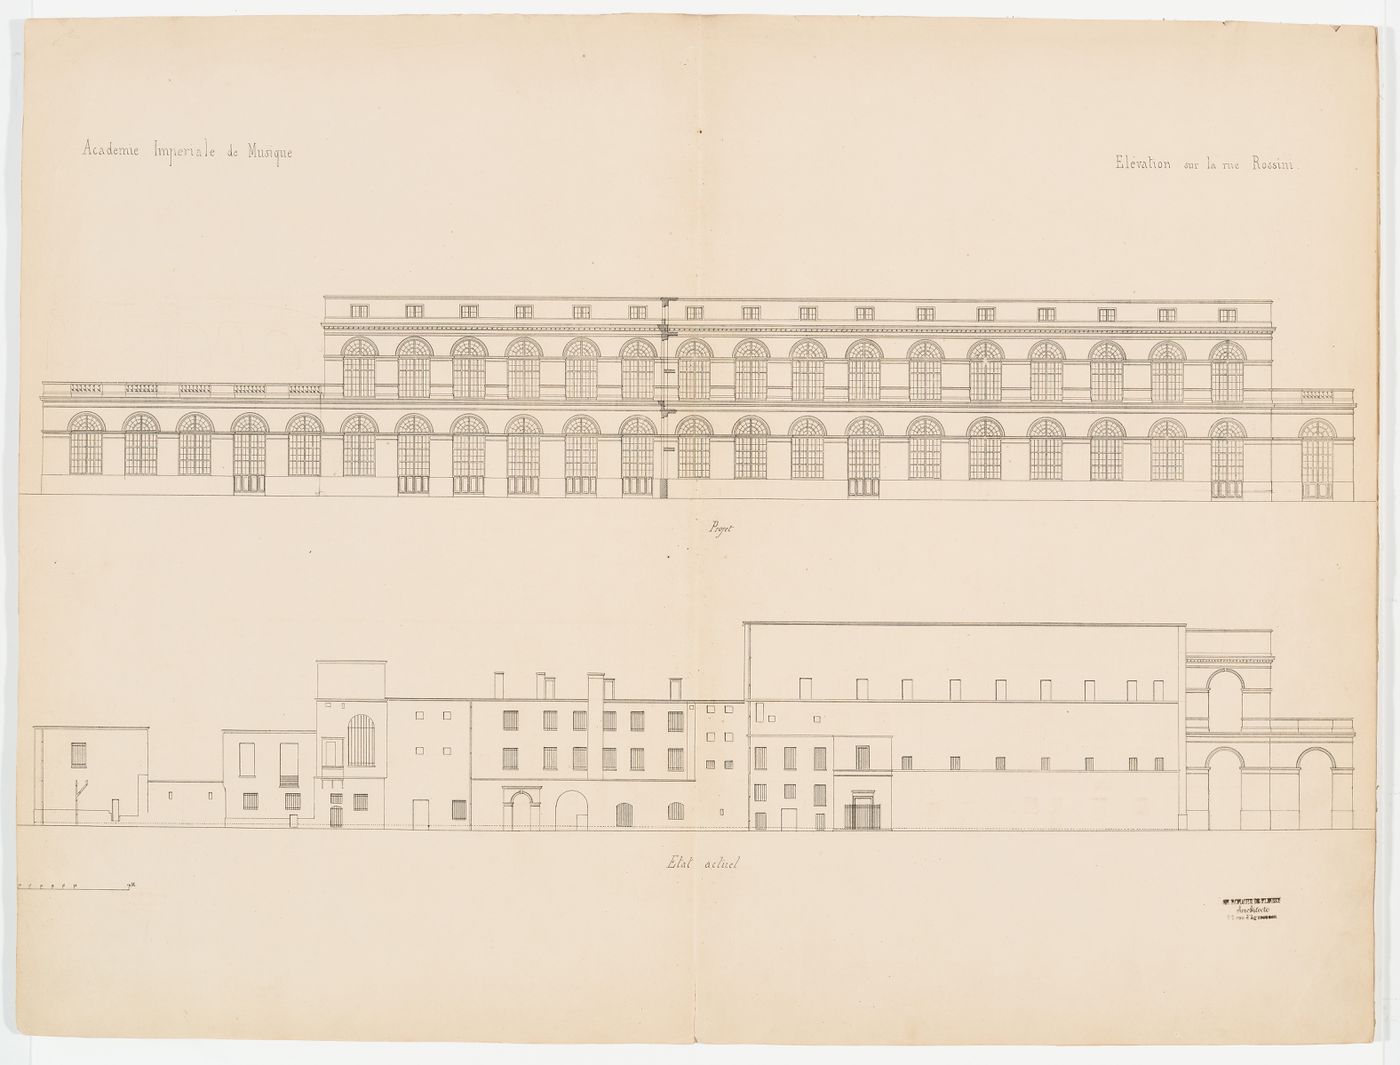 Side elevations of Salle Le Peletier, one with additions for a new design